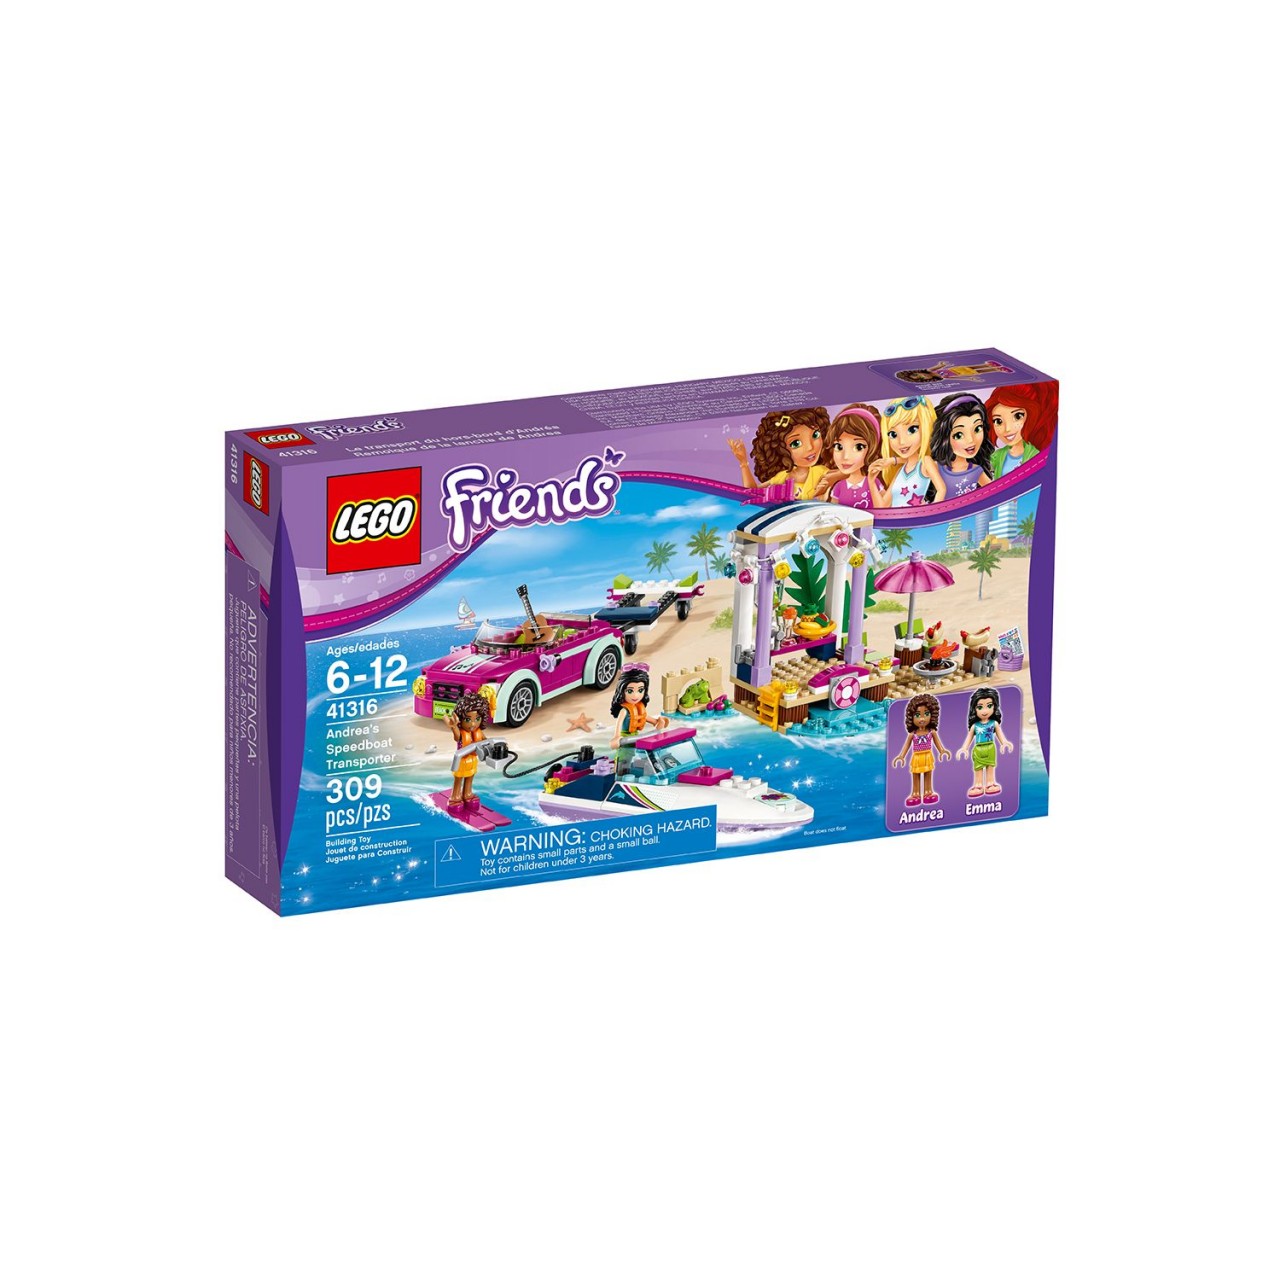 LEGO FRIENDS 41316 Andreas Rennboot-Transporter